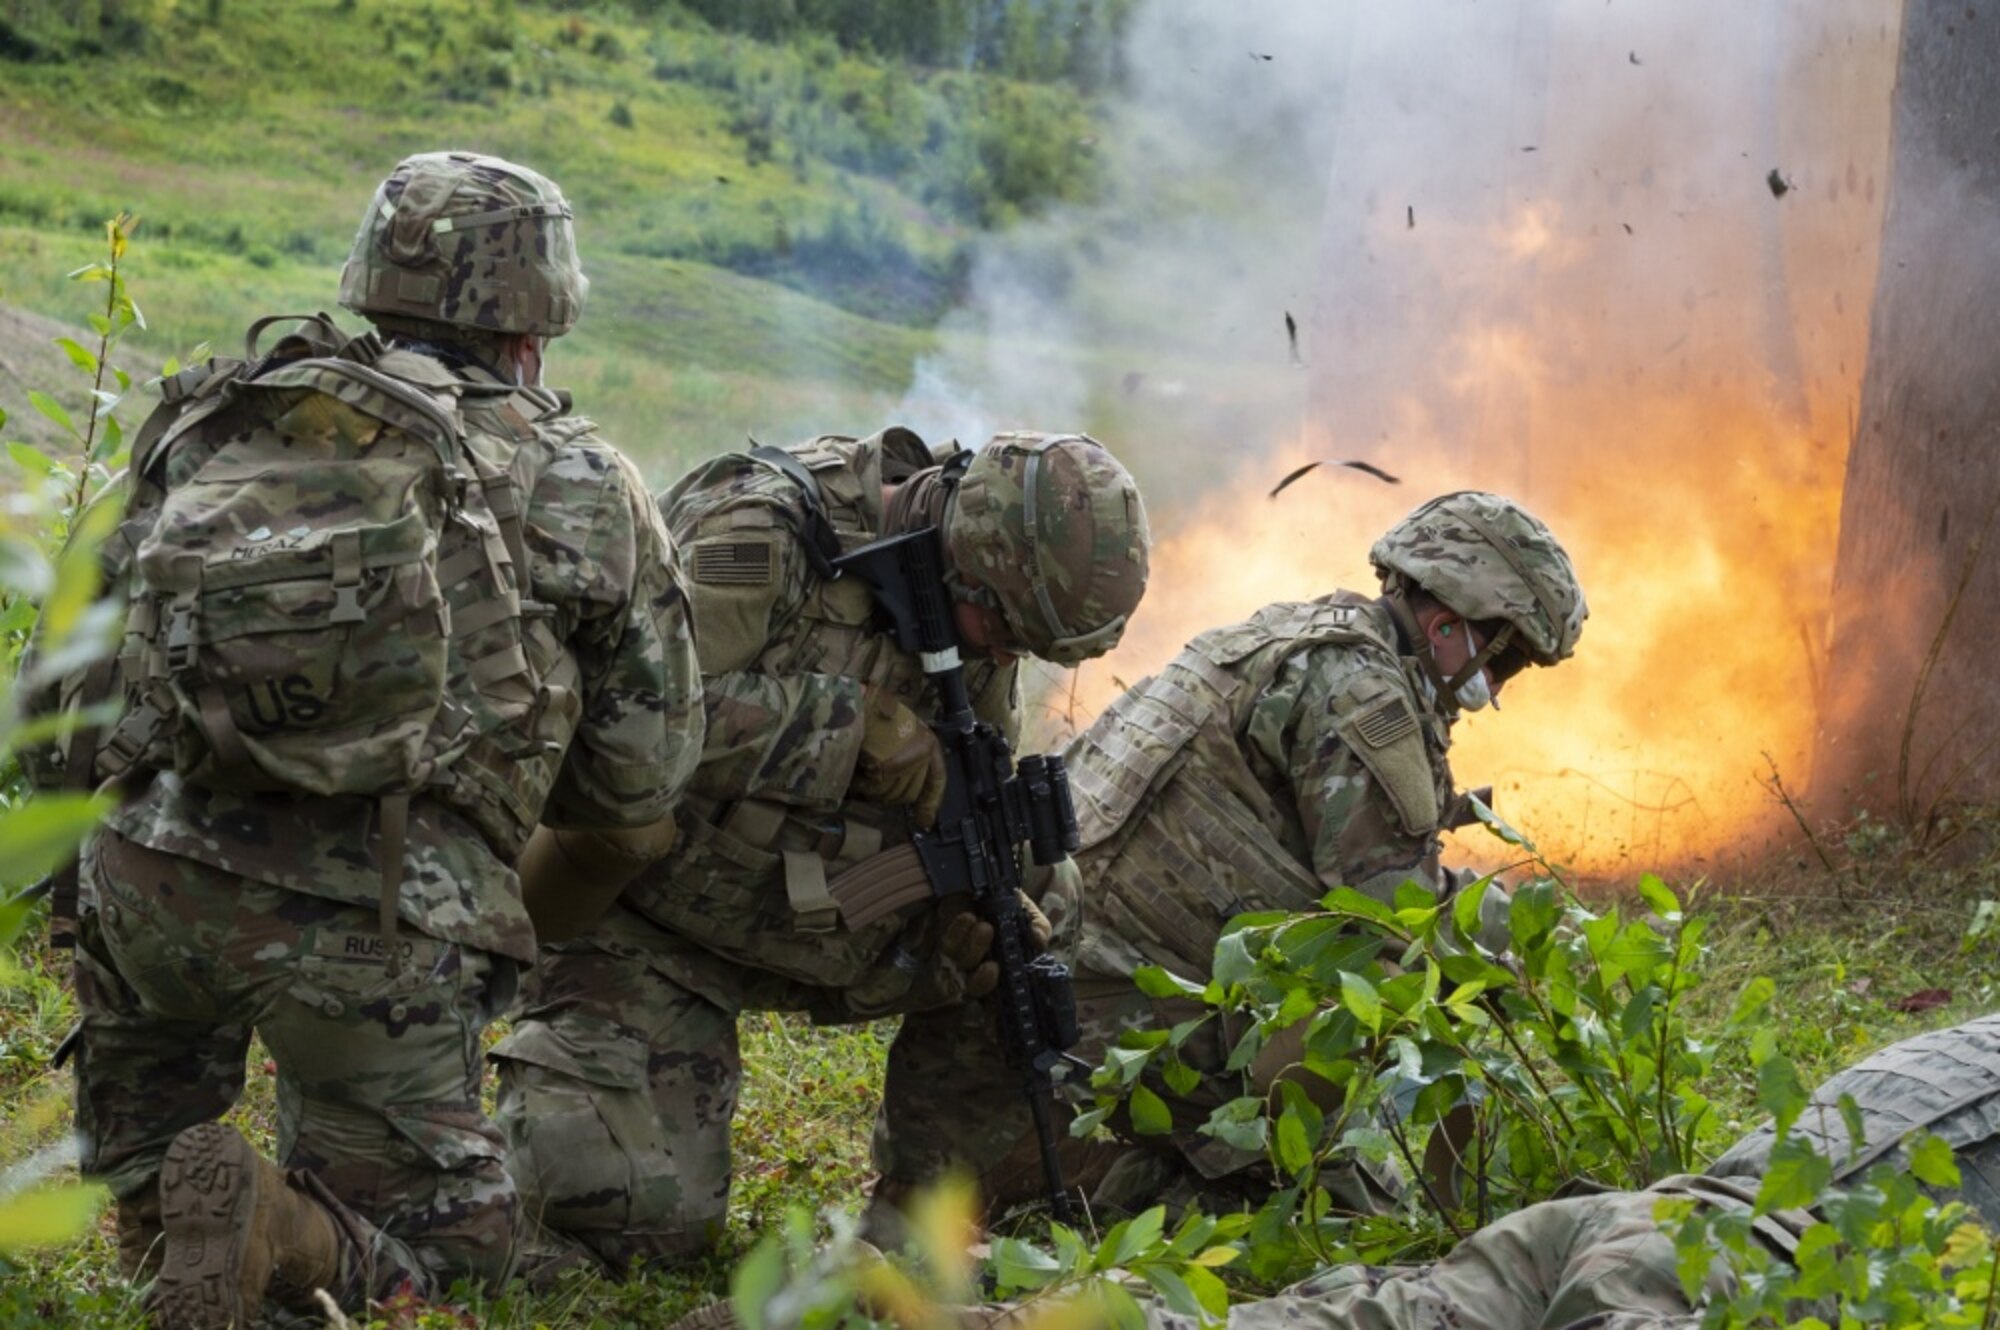 Combat engineers assigned to Sapper Company, 6th Brigade Engineer Battalion (Airborne), 4th Infantry Brigade Combat Team (Airborne), 25th Infantry Division, U.S. Army Alaska, utilize a controlled detonation to breach a simulated enemy position during live-fire training on the Infantry Squad Battle Course at Joint Base Elmendorf-Richardson, Alaska, Aug. 12, 2020. The Soldiers focused on honing core ground combat skills such as fire team movement, communication, breaching and destroying simulated enemy positions by assault and maneuver. (U.S. Air Force photo by Alejandro Peña)